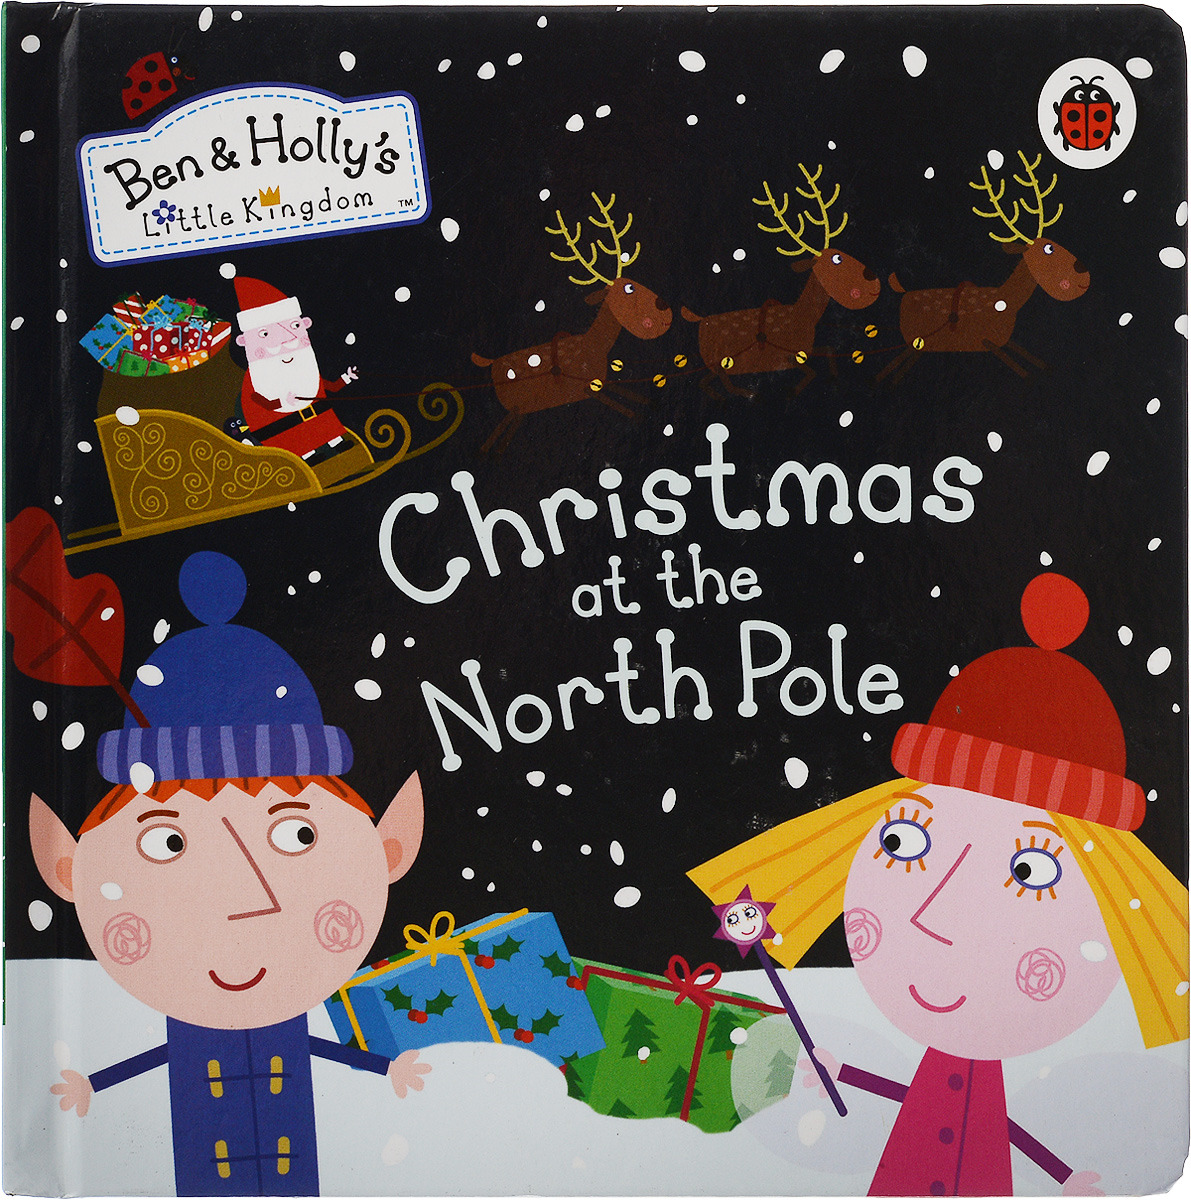 Holly s little kingdom. Ben and Holly's little Kingdom. Ben and Holly Christmas. Ben and Holly's little Kingdom Christmas. Ben and Holly the North Pole.